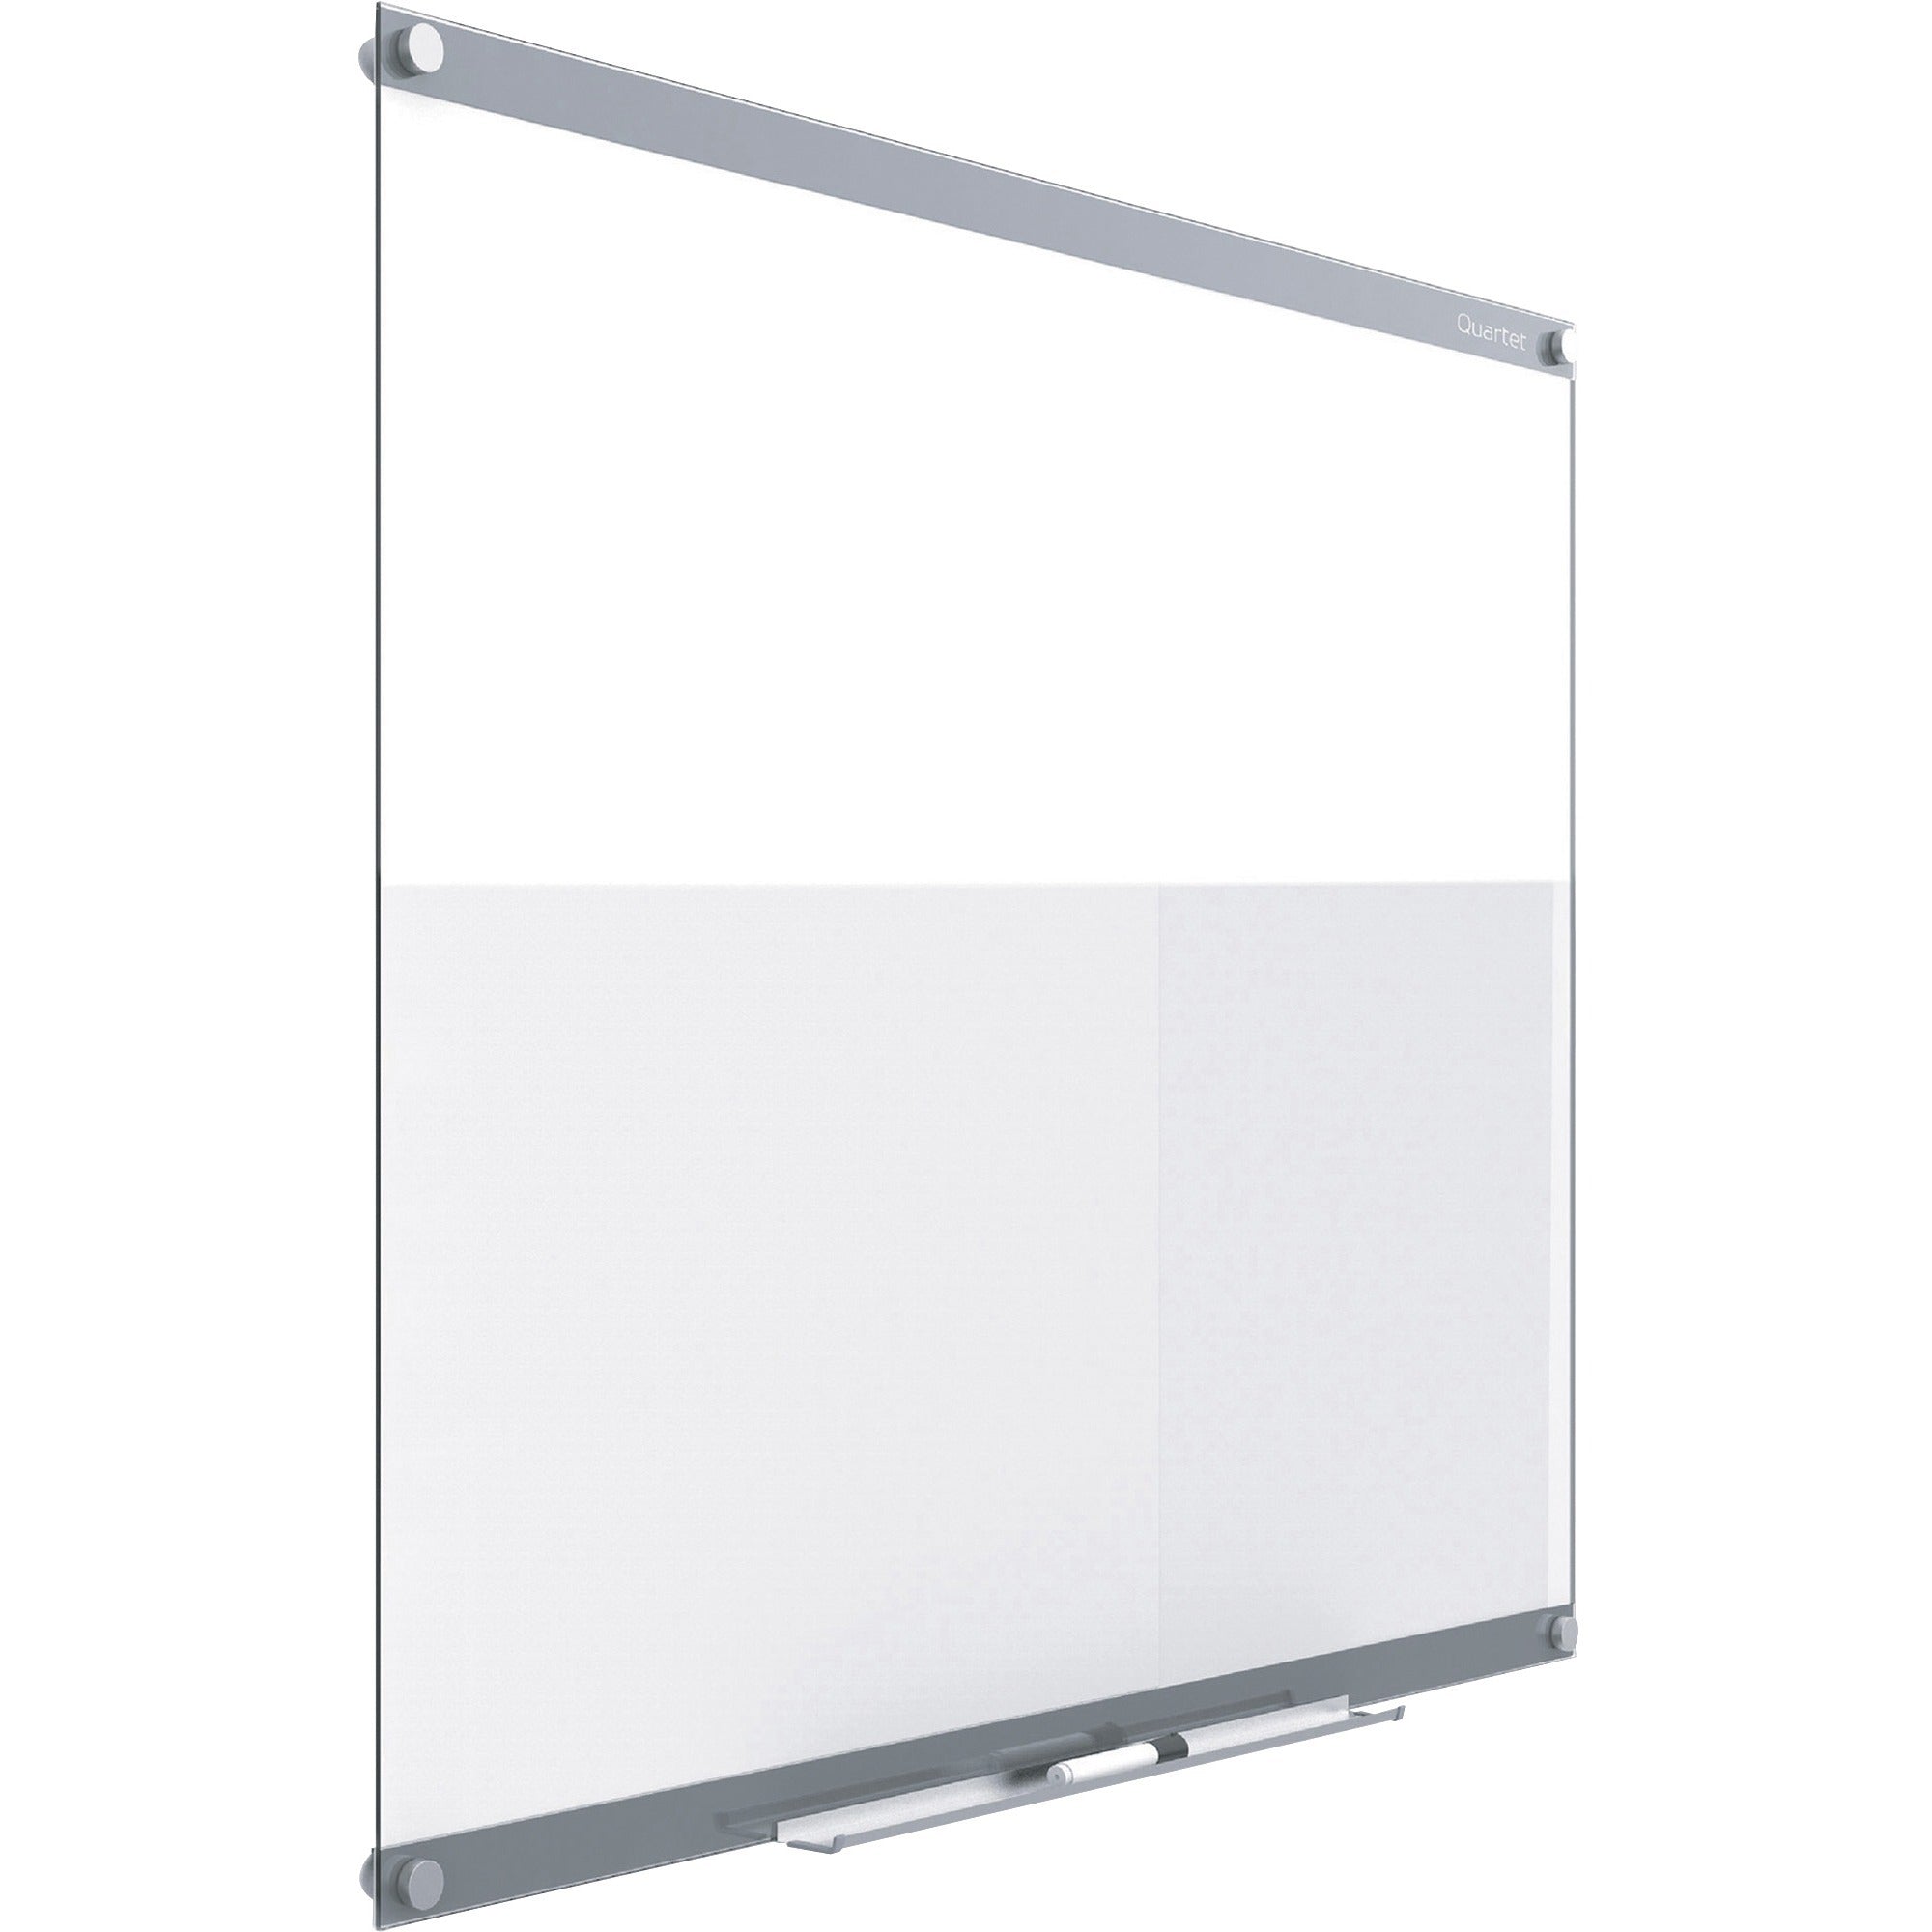 quartet-infinity-customizable-dry-erase-board-36-3-ft-width-x-24-2-ft-height-clear-white-glass-surface-rectangle-horizontal-vertical-magnetic-assembly-required-1-each_qrtgi3624 - 1